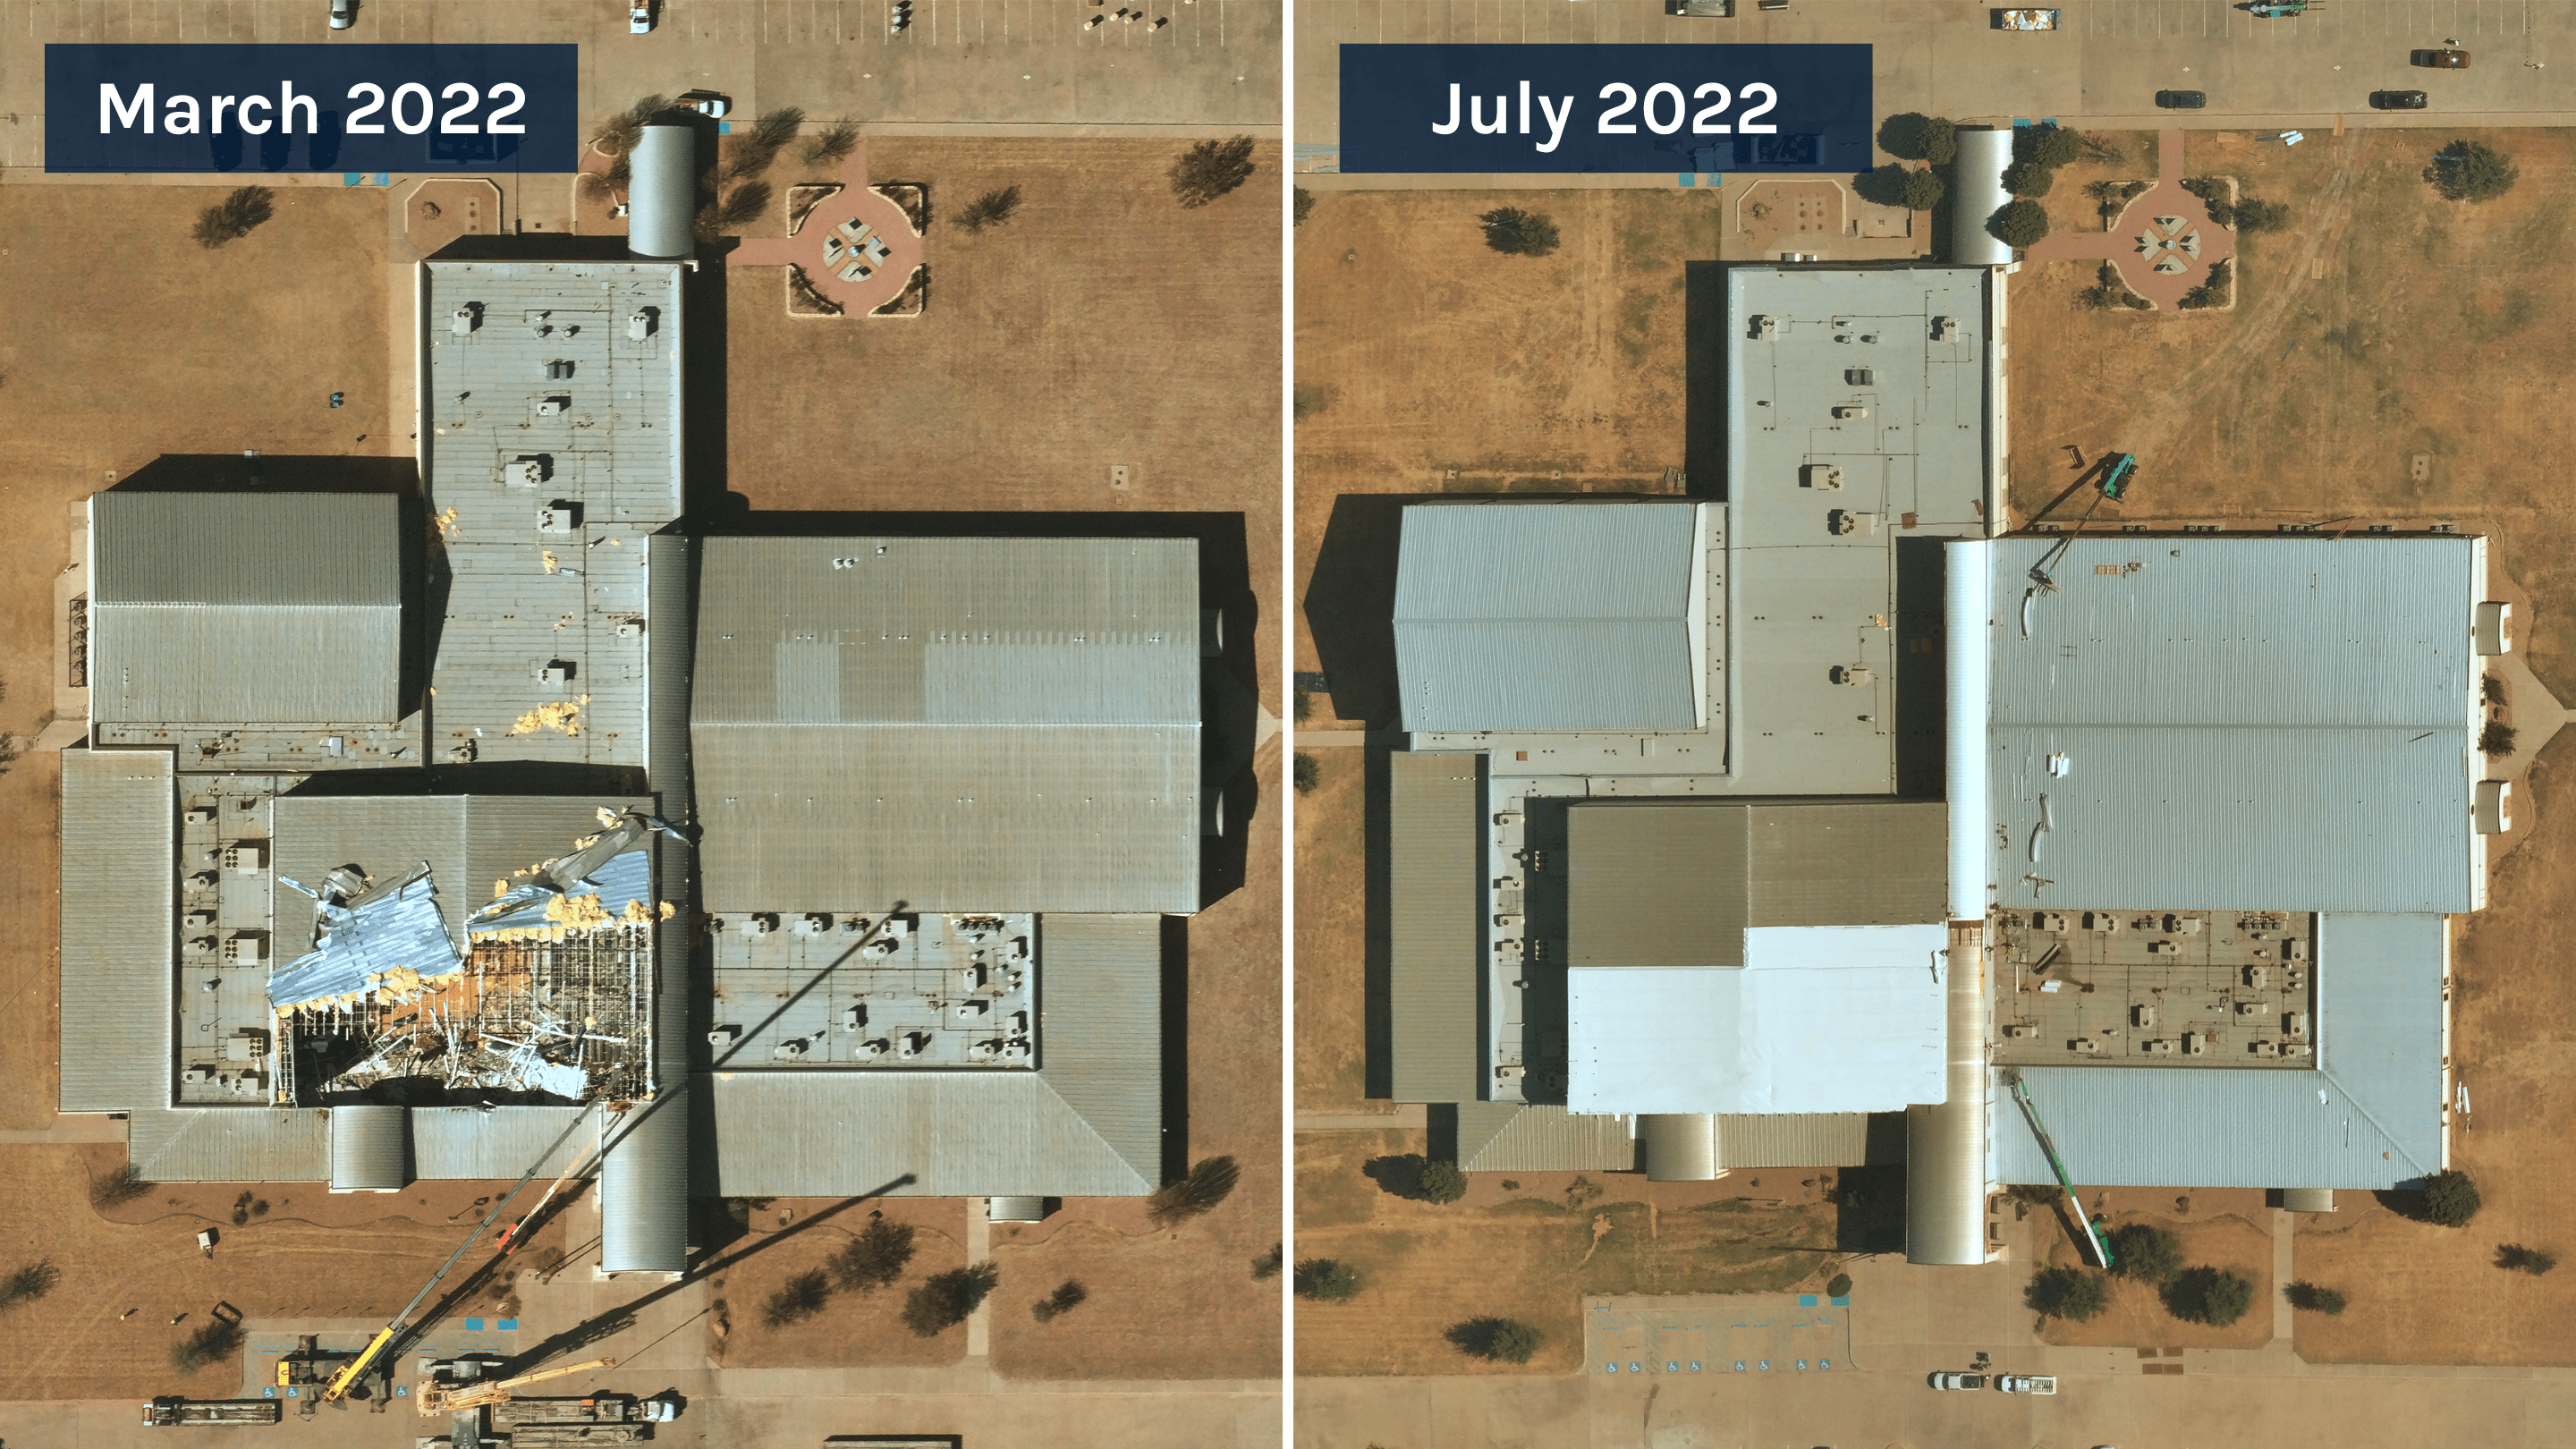 Near Space Labs' 10 cm capture of Jacksboro High School showing roofing damage directly after a tornado, next to the same building four months later showing a repaired roof. 